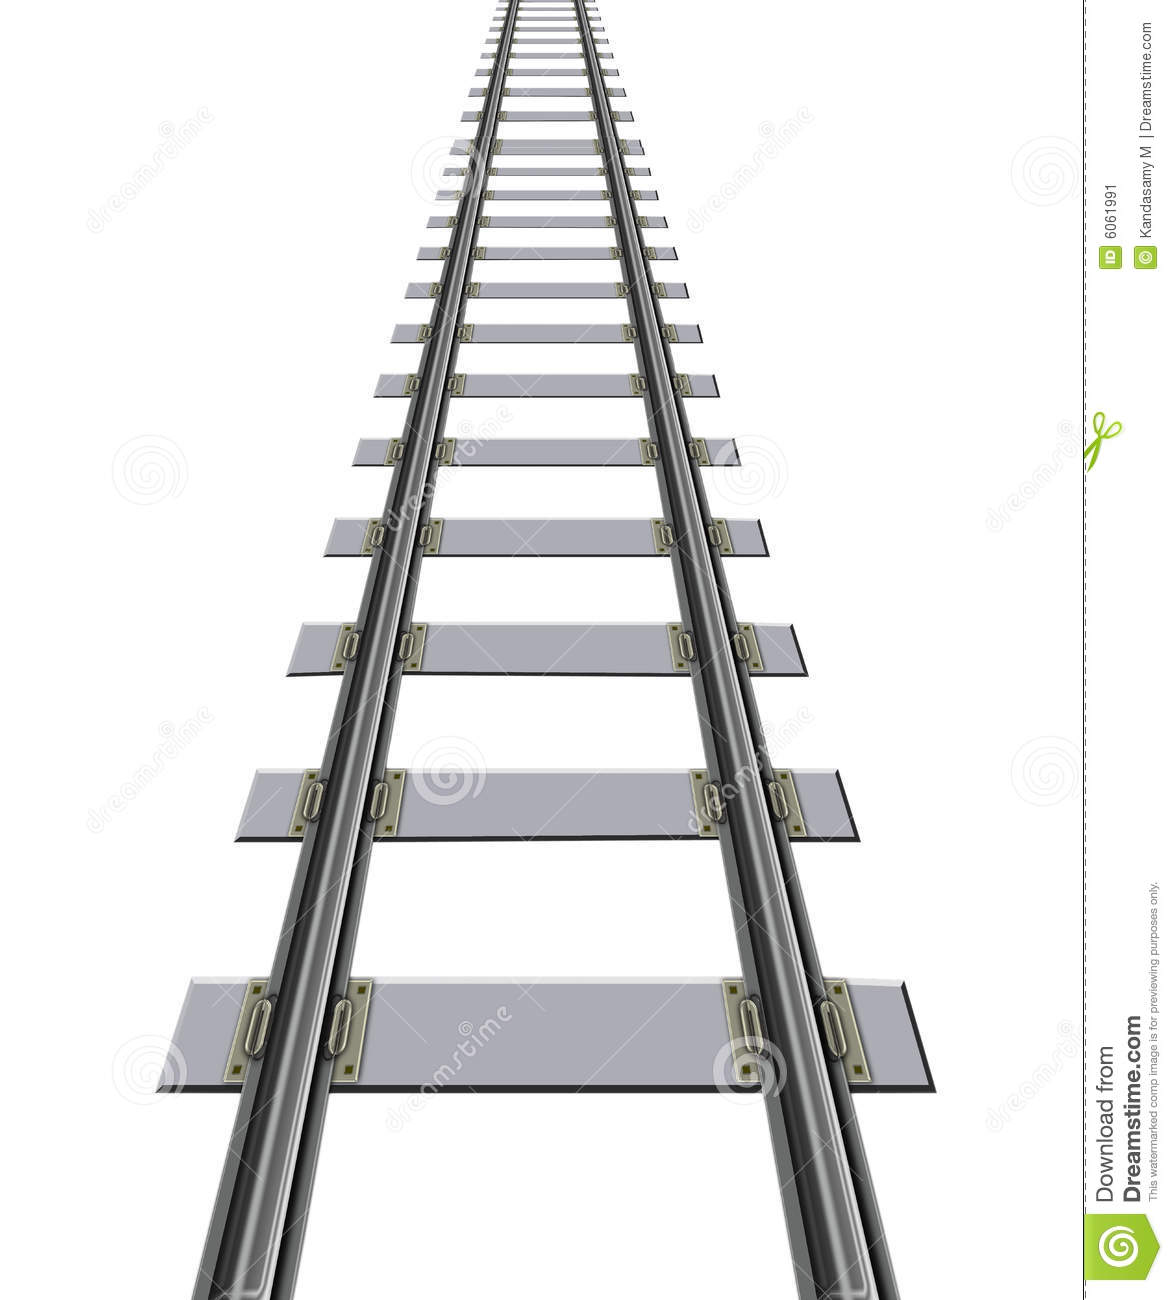 Clipart Train Tracks Free Download Wallpaper Hd #1837 - Train Track, Transparent background PNG HD thumbnail